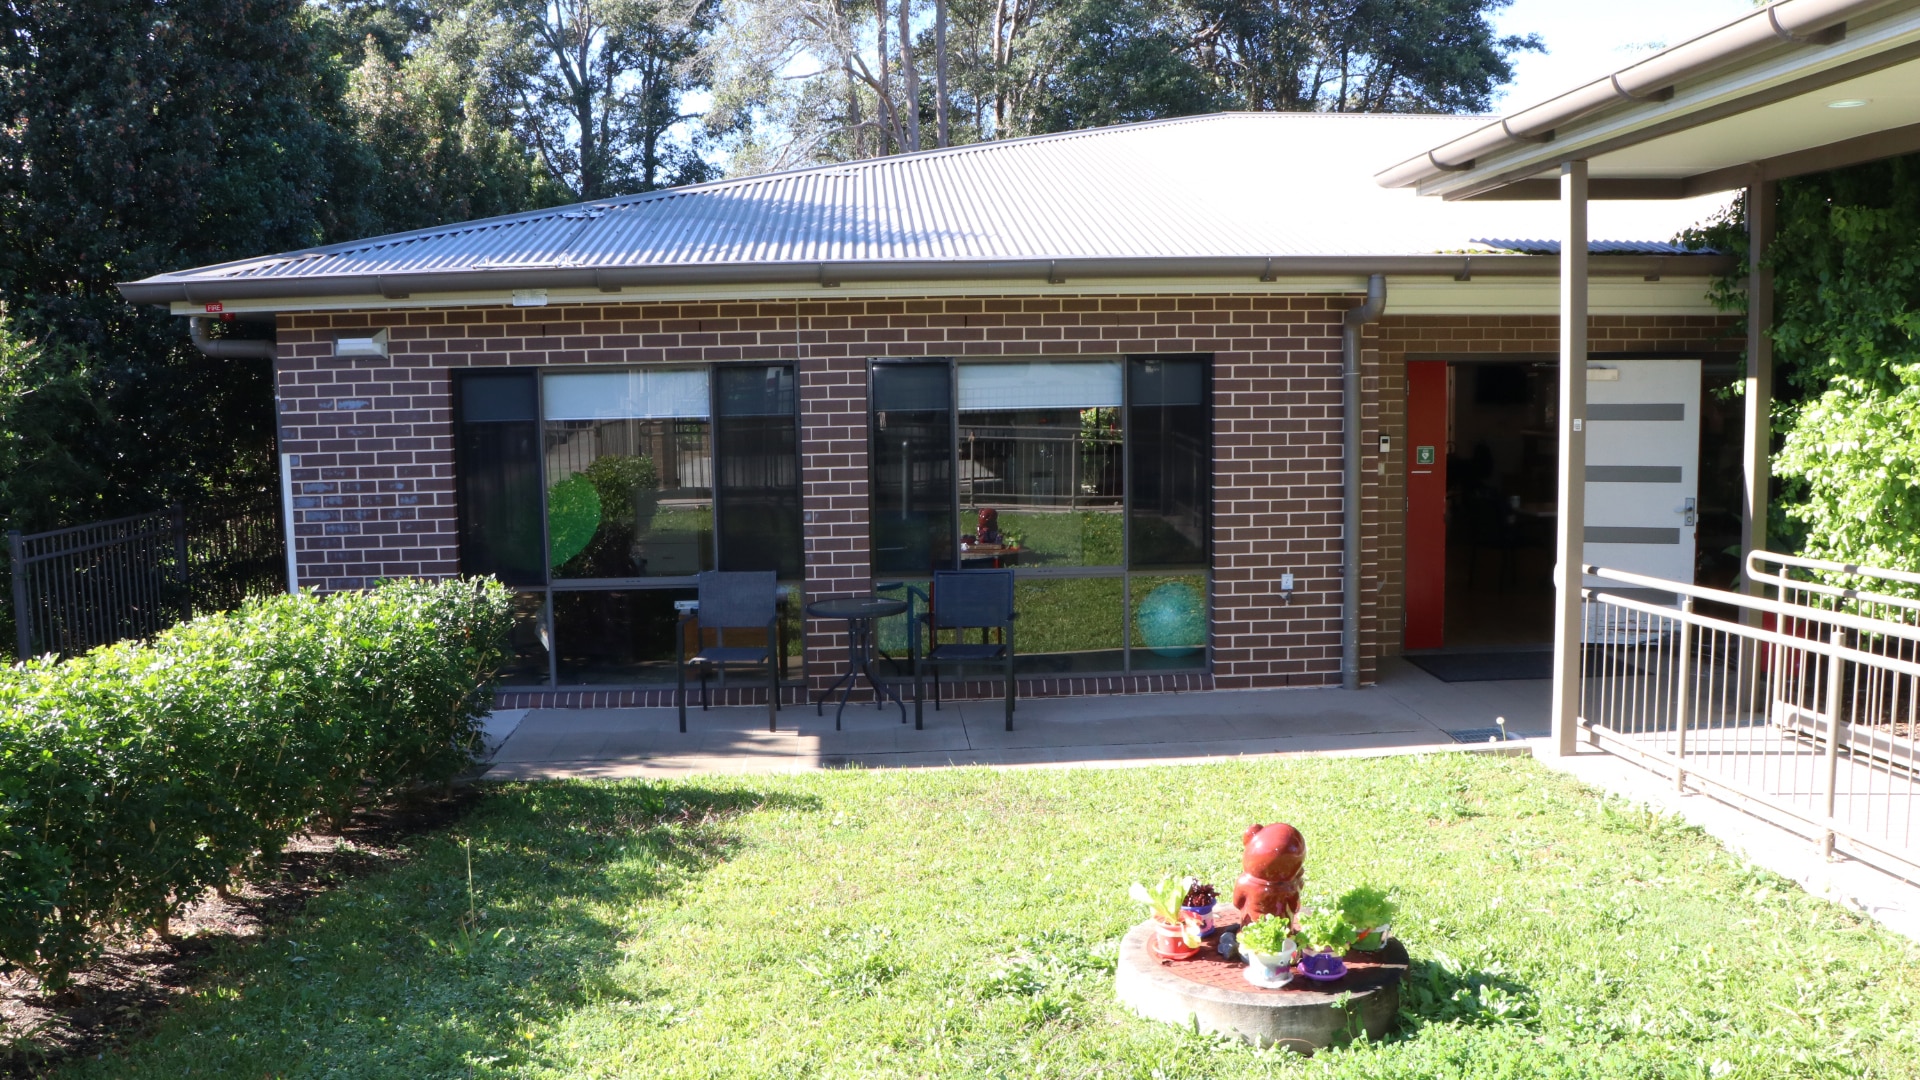 Front view of the Asquith 2 property, a single storey brick home with grassed front yard.